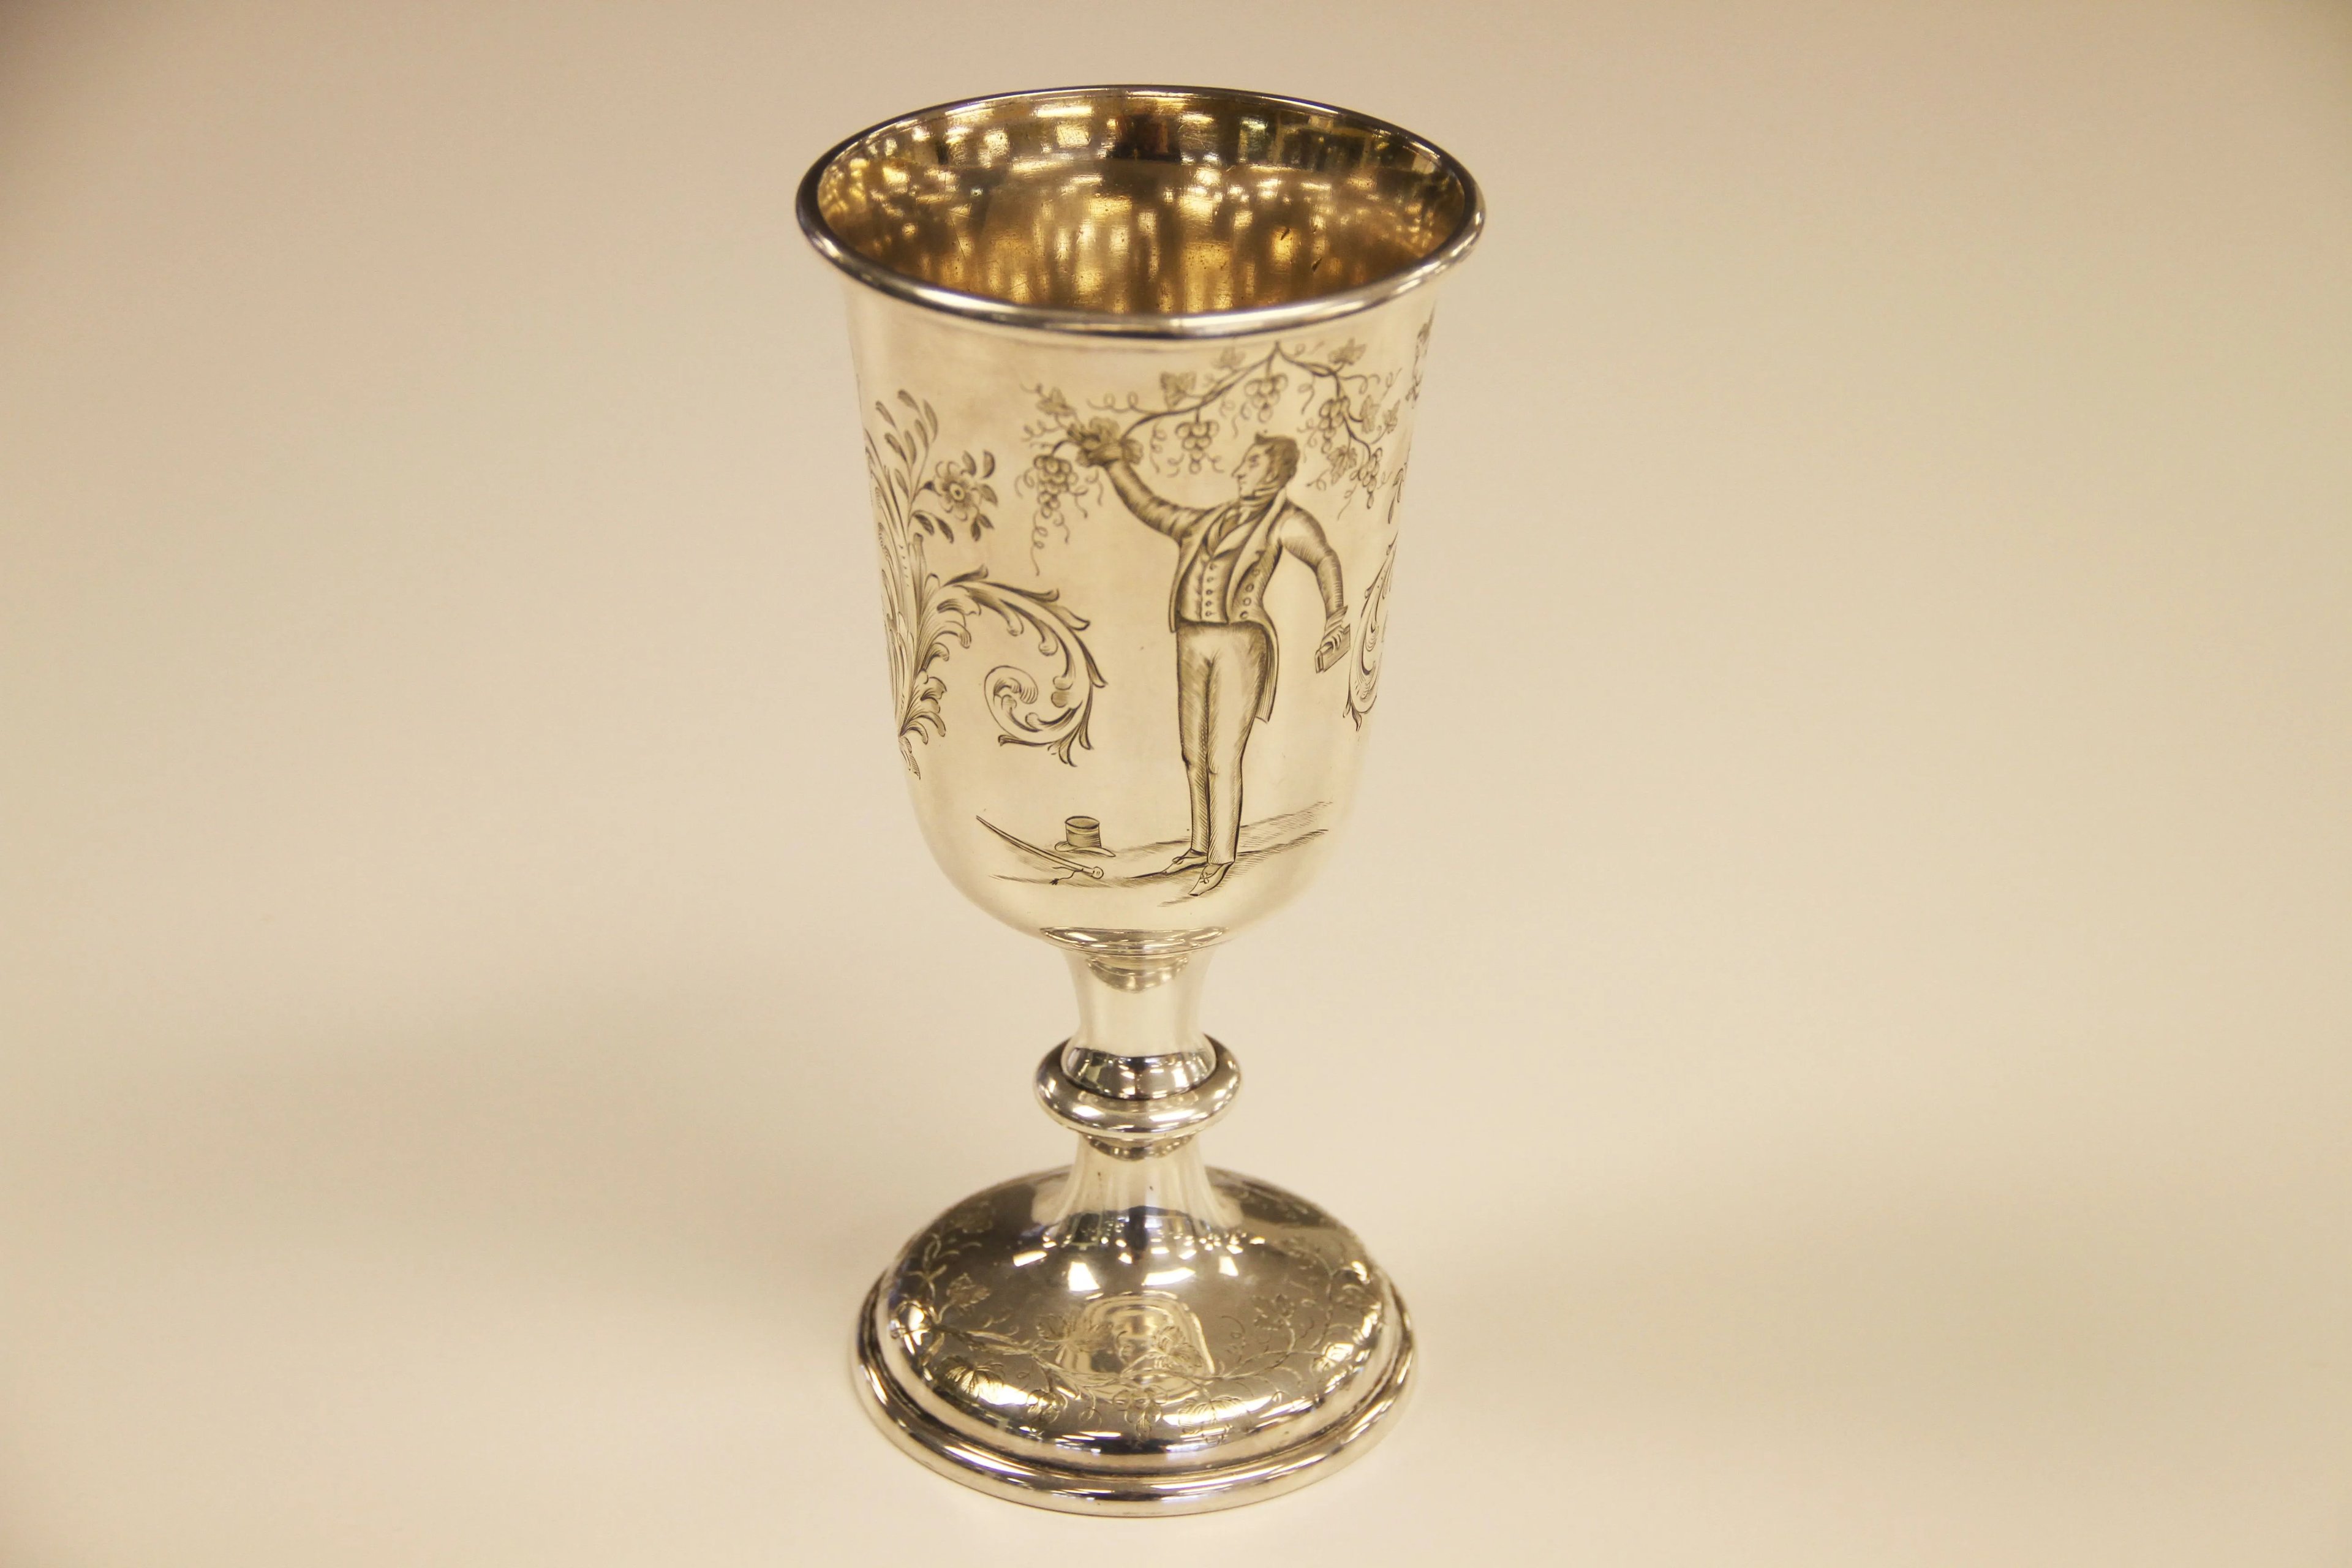 An image of a silver goblet from 1847 against a plain background, used in Latter-day Saint or Mormon sacrament services, with an engraved image of Joseph Smith among grapevines.